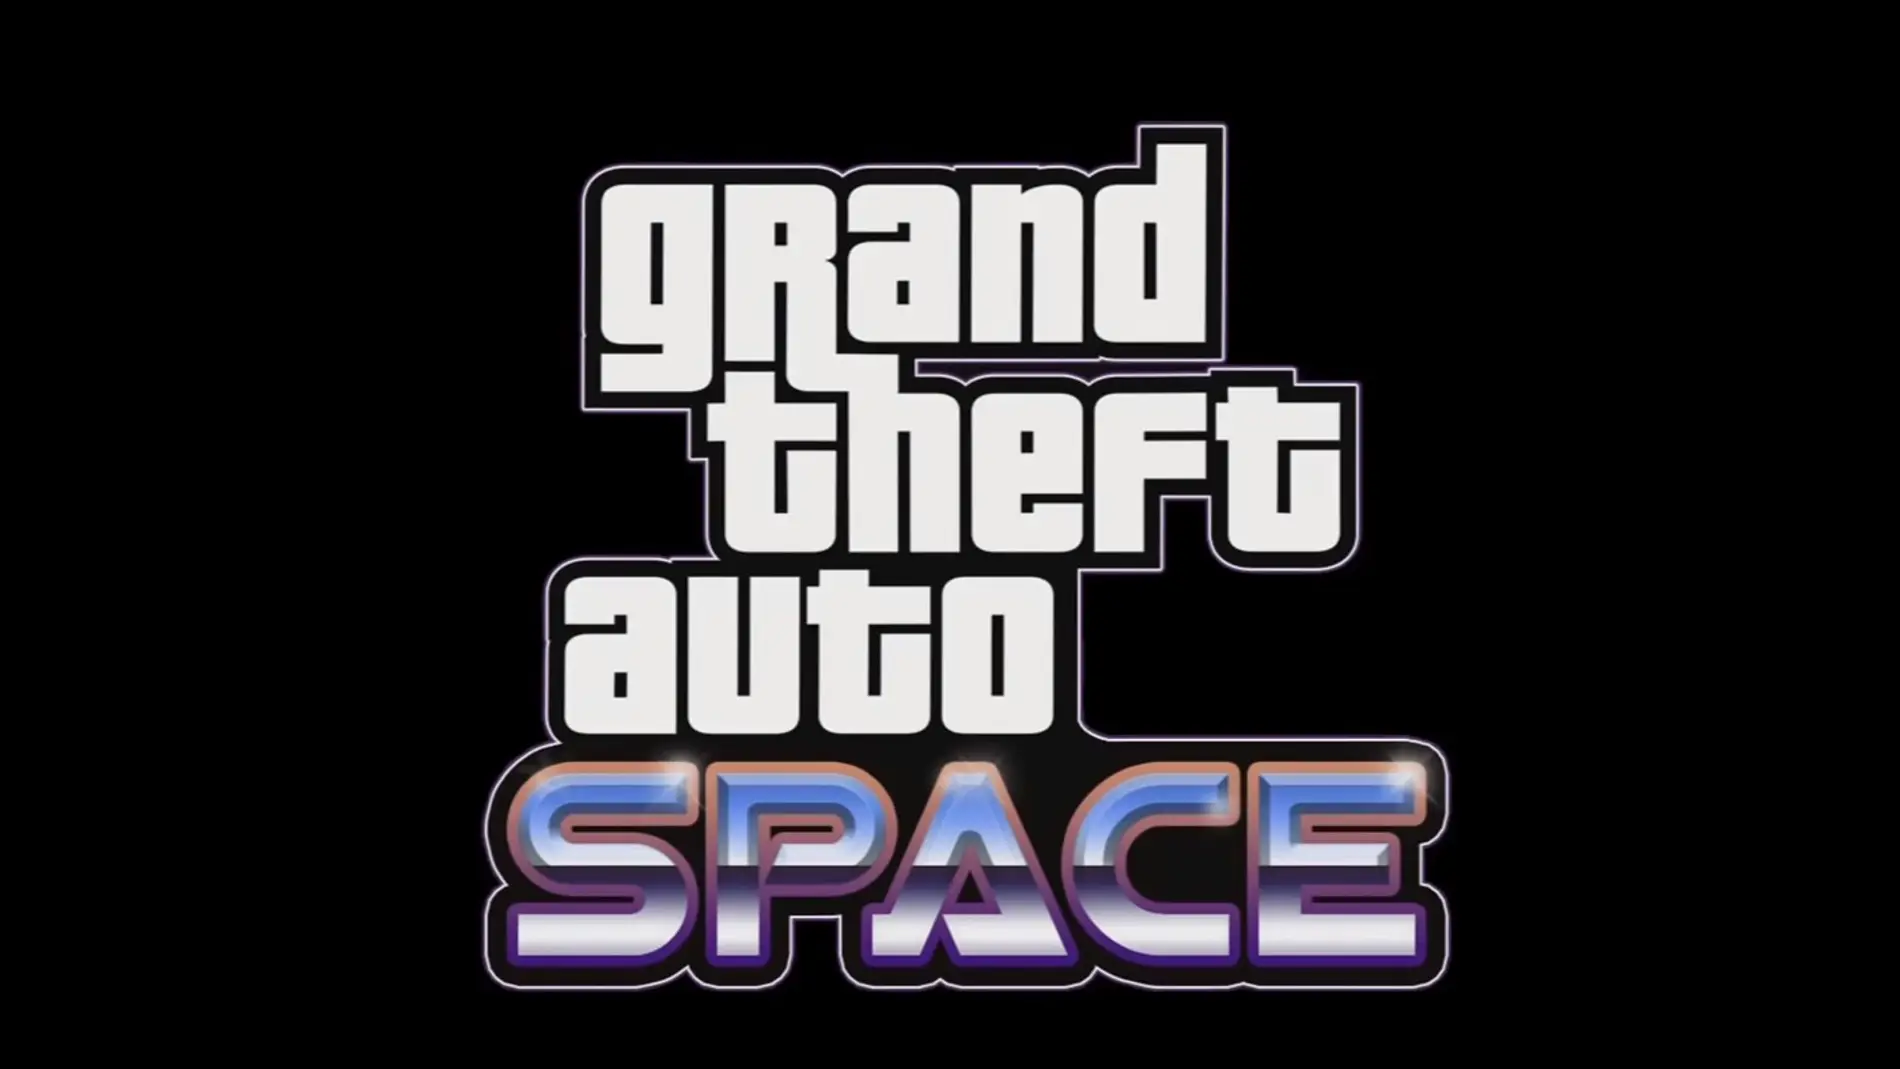 Grand Theft Space